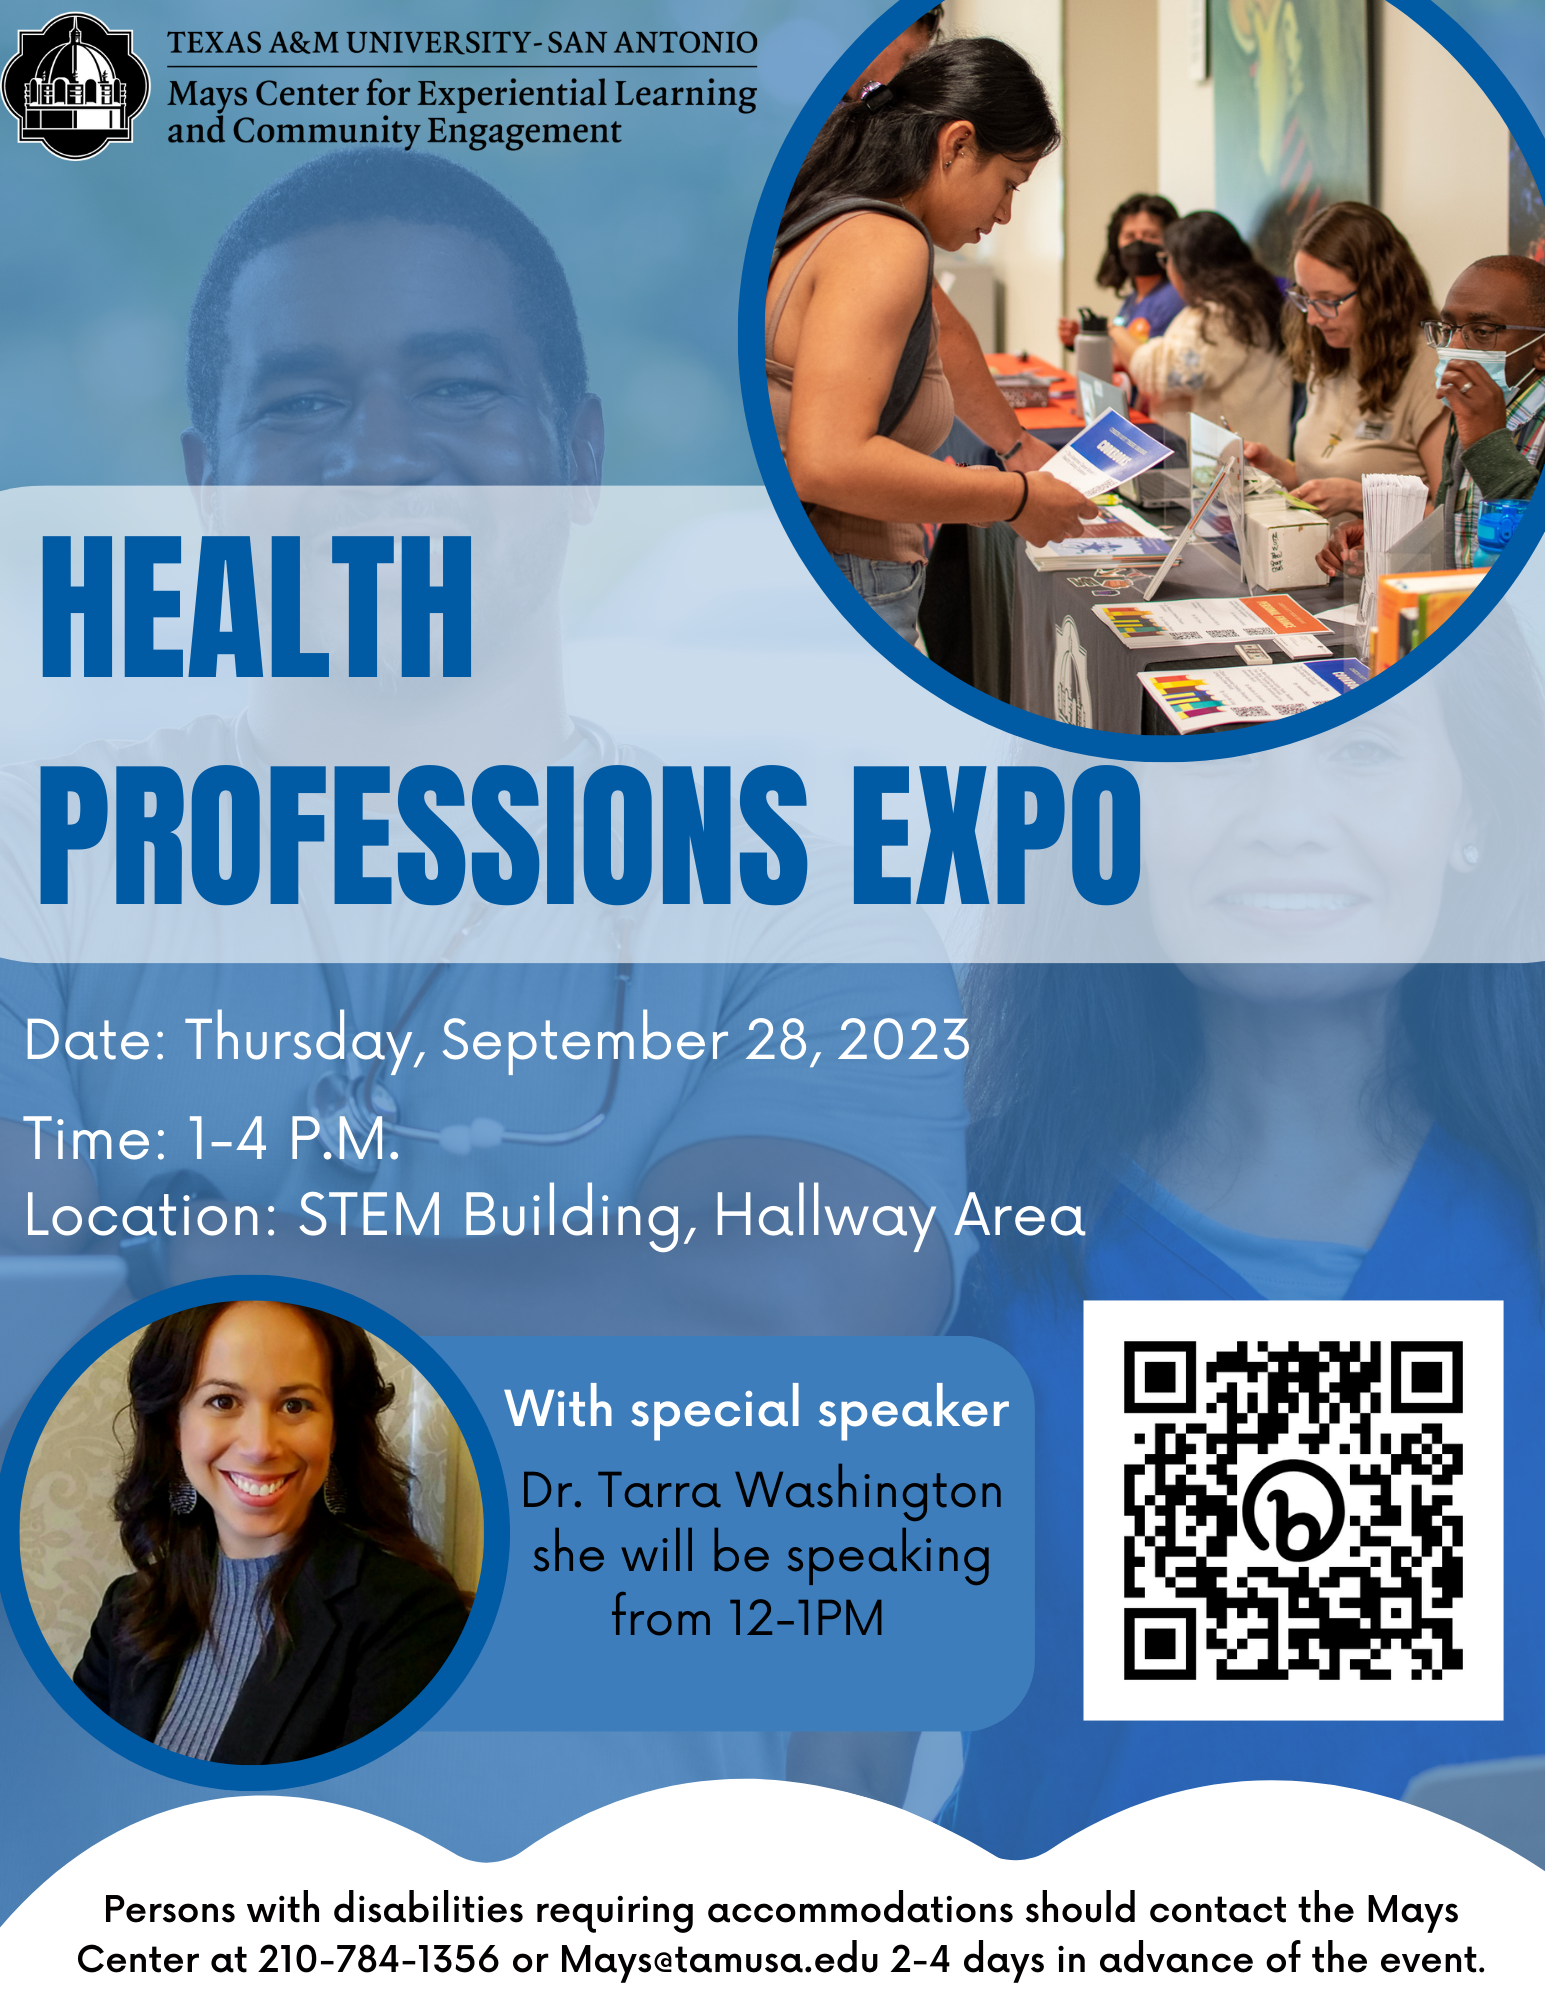 Health Professions Expo Flyer